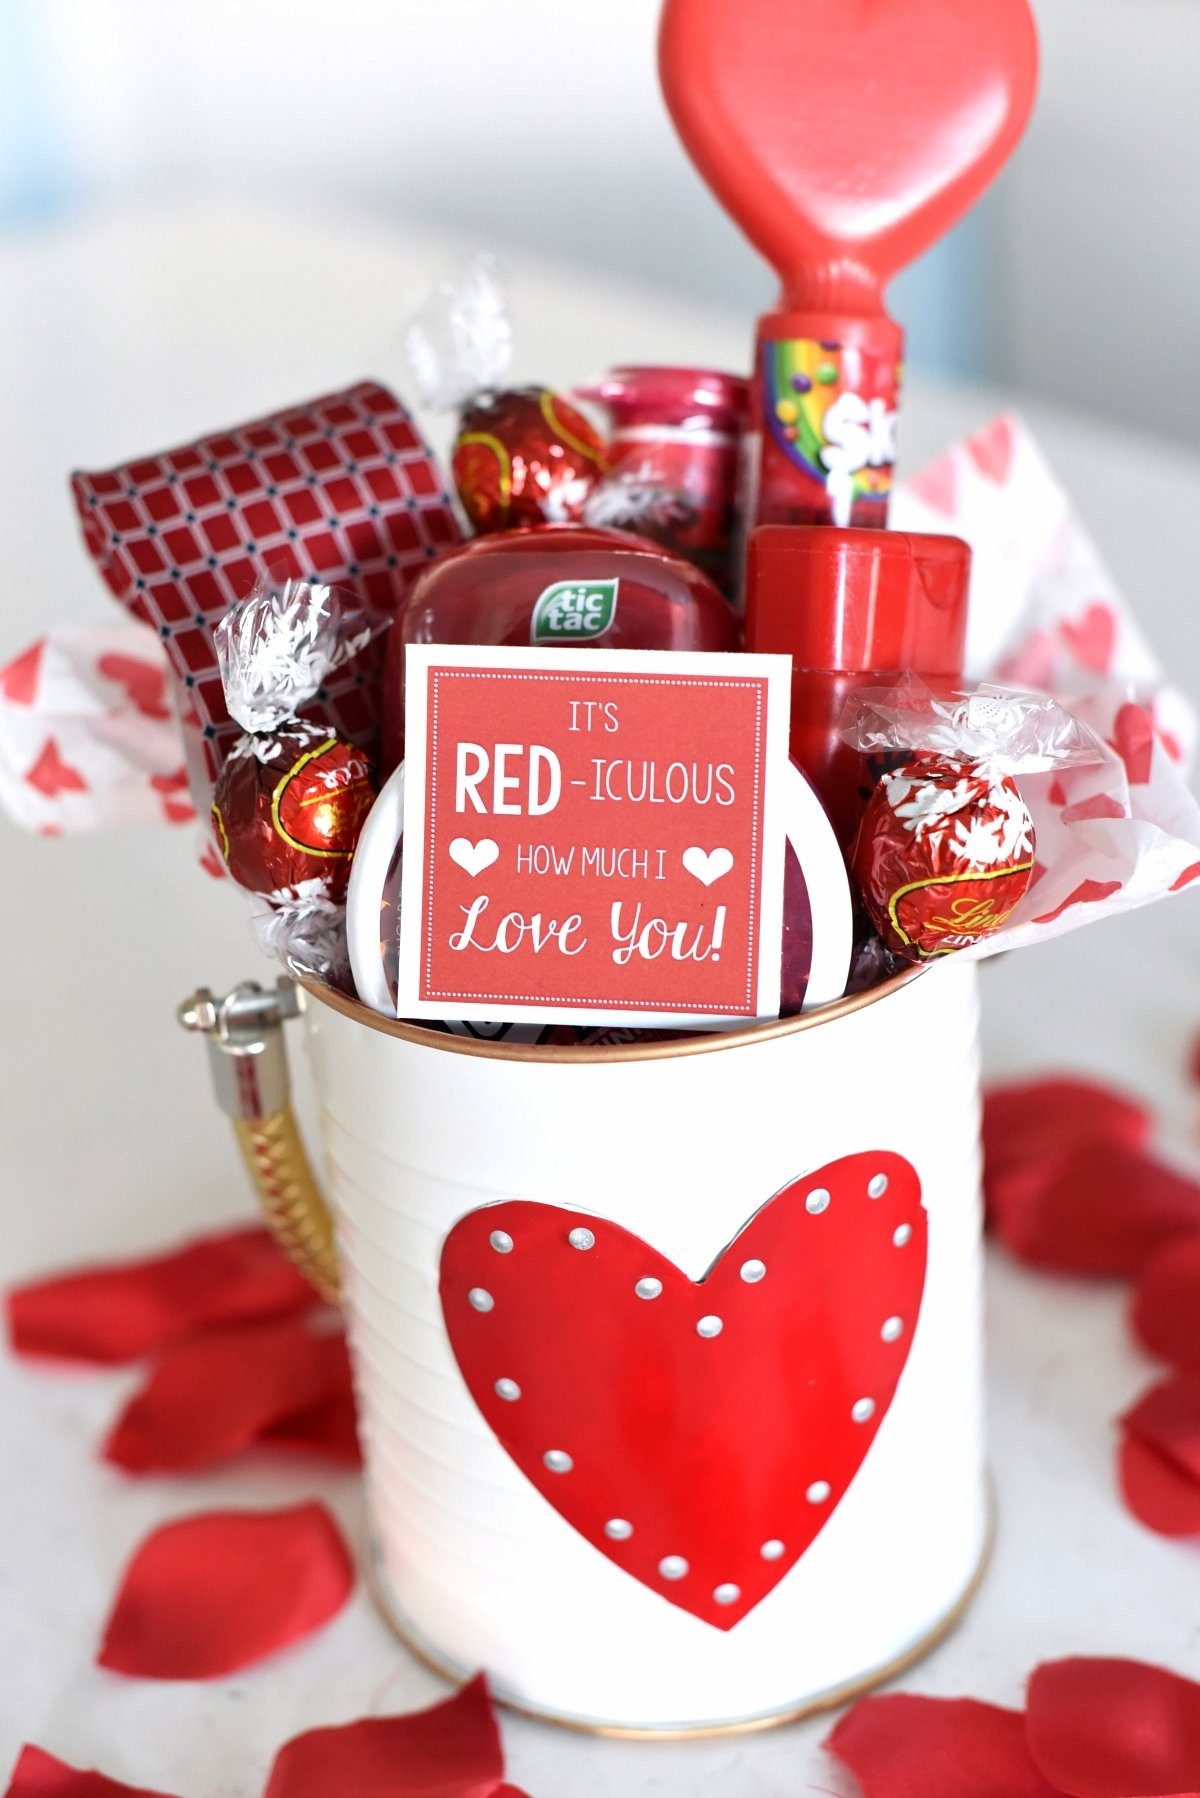 Valentines Day 2020 Gift Ideas
 10 Elegant Valentines Day Gift Ideas For Wife 2020